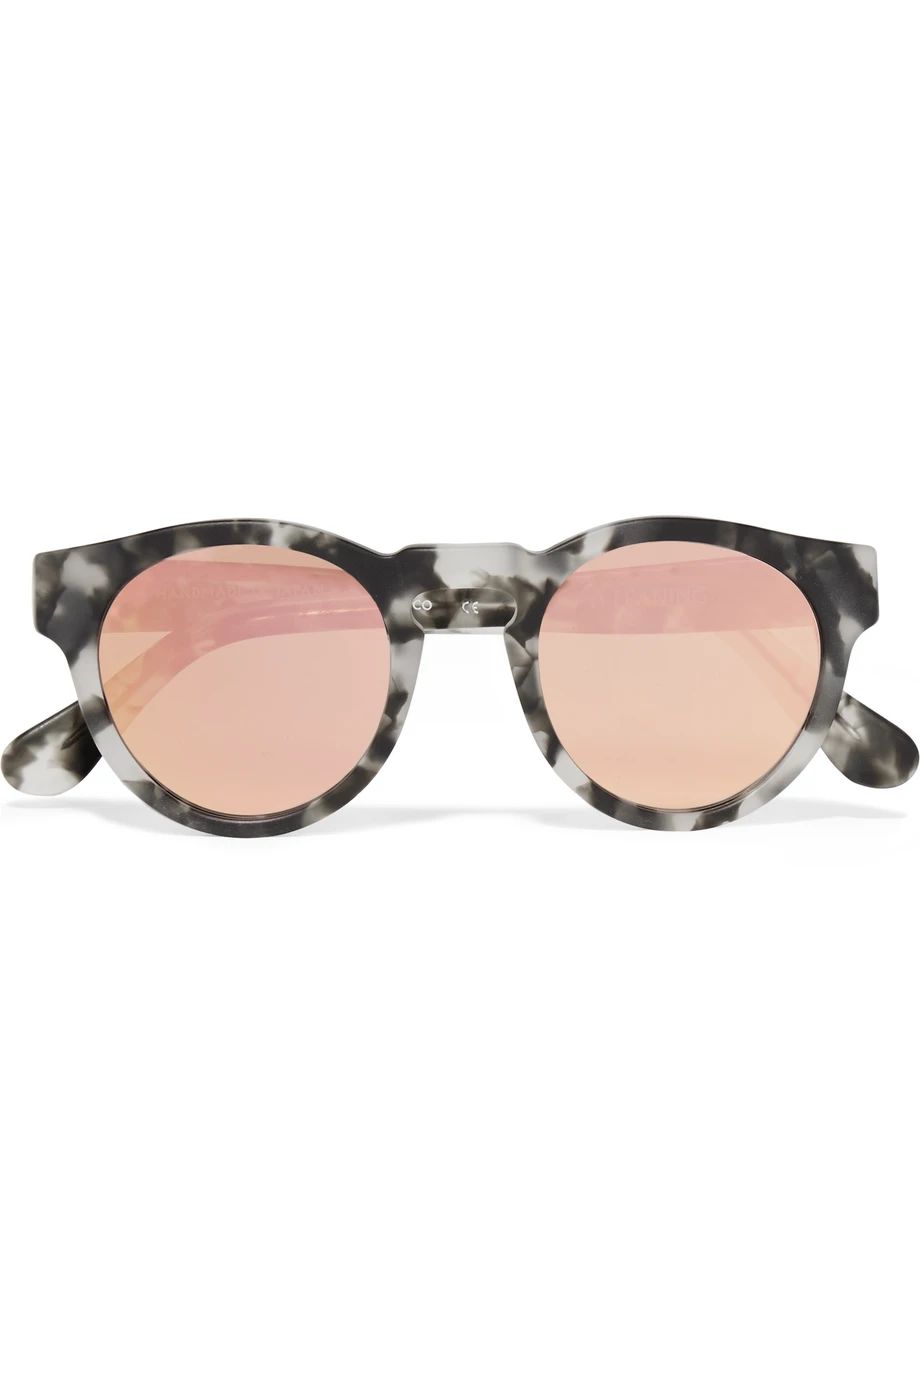 Voyager 15 Round-Frame Acetate Mirrored Sunglasses, Black/Rose Gold, Women's | NET-A-PORTER (US)